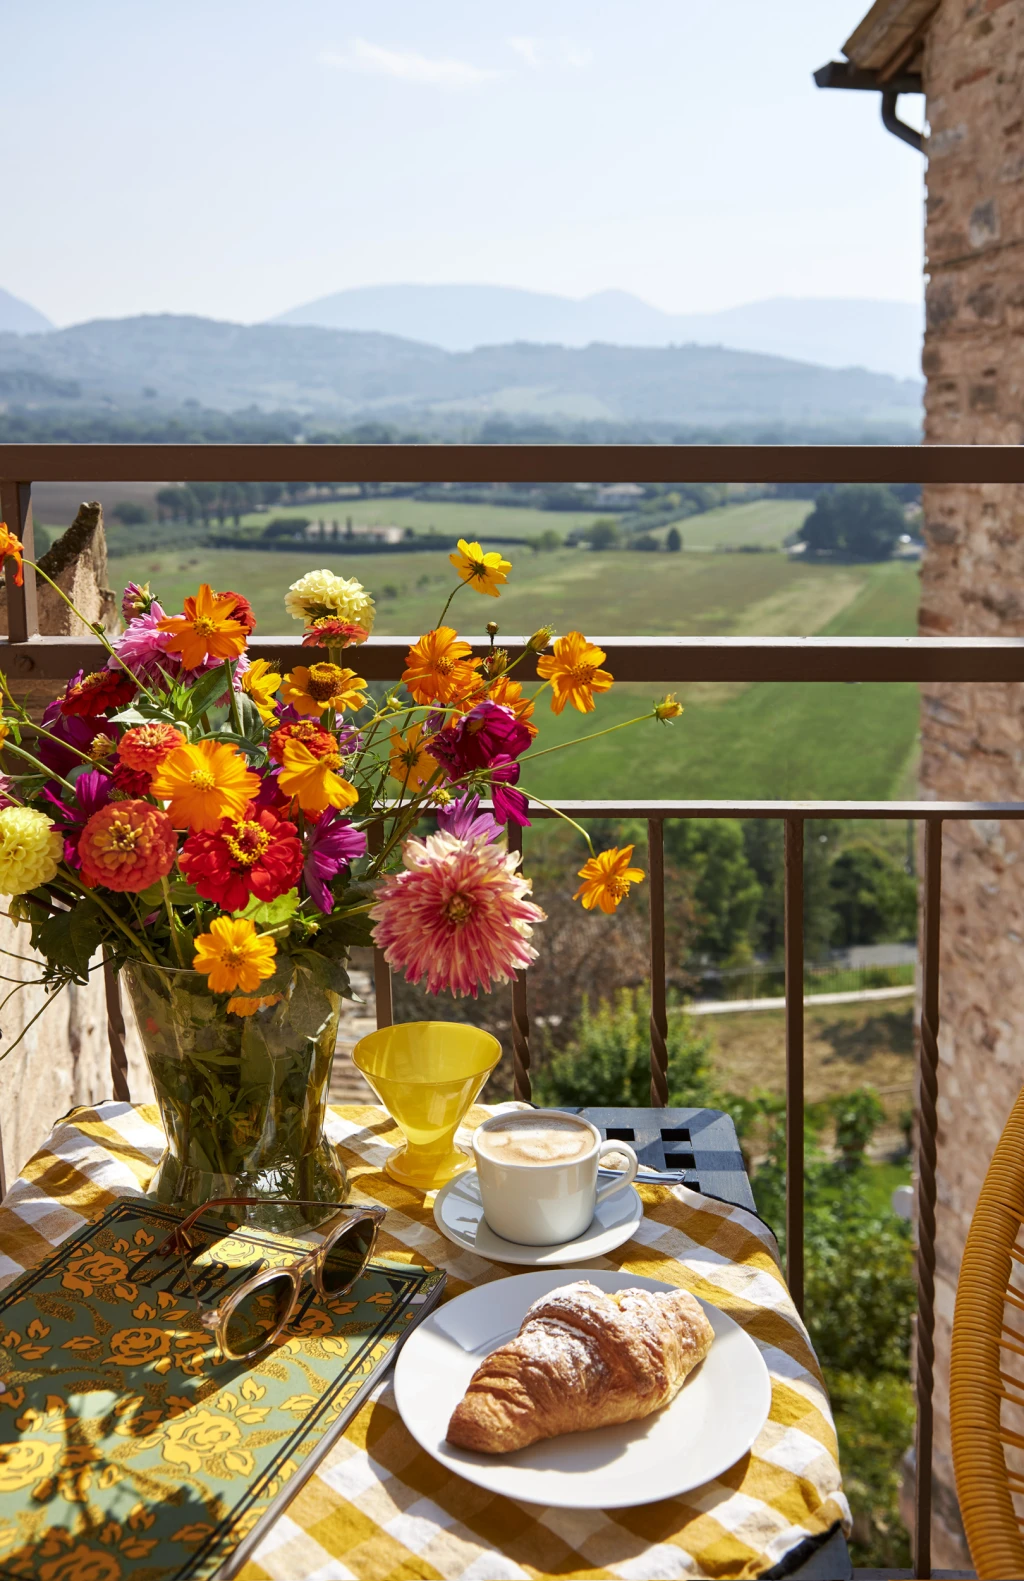 A beautiful balcony that overlooks the Umbrian hills